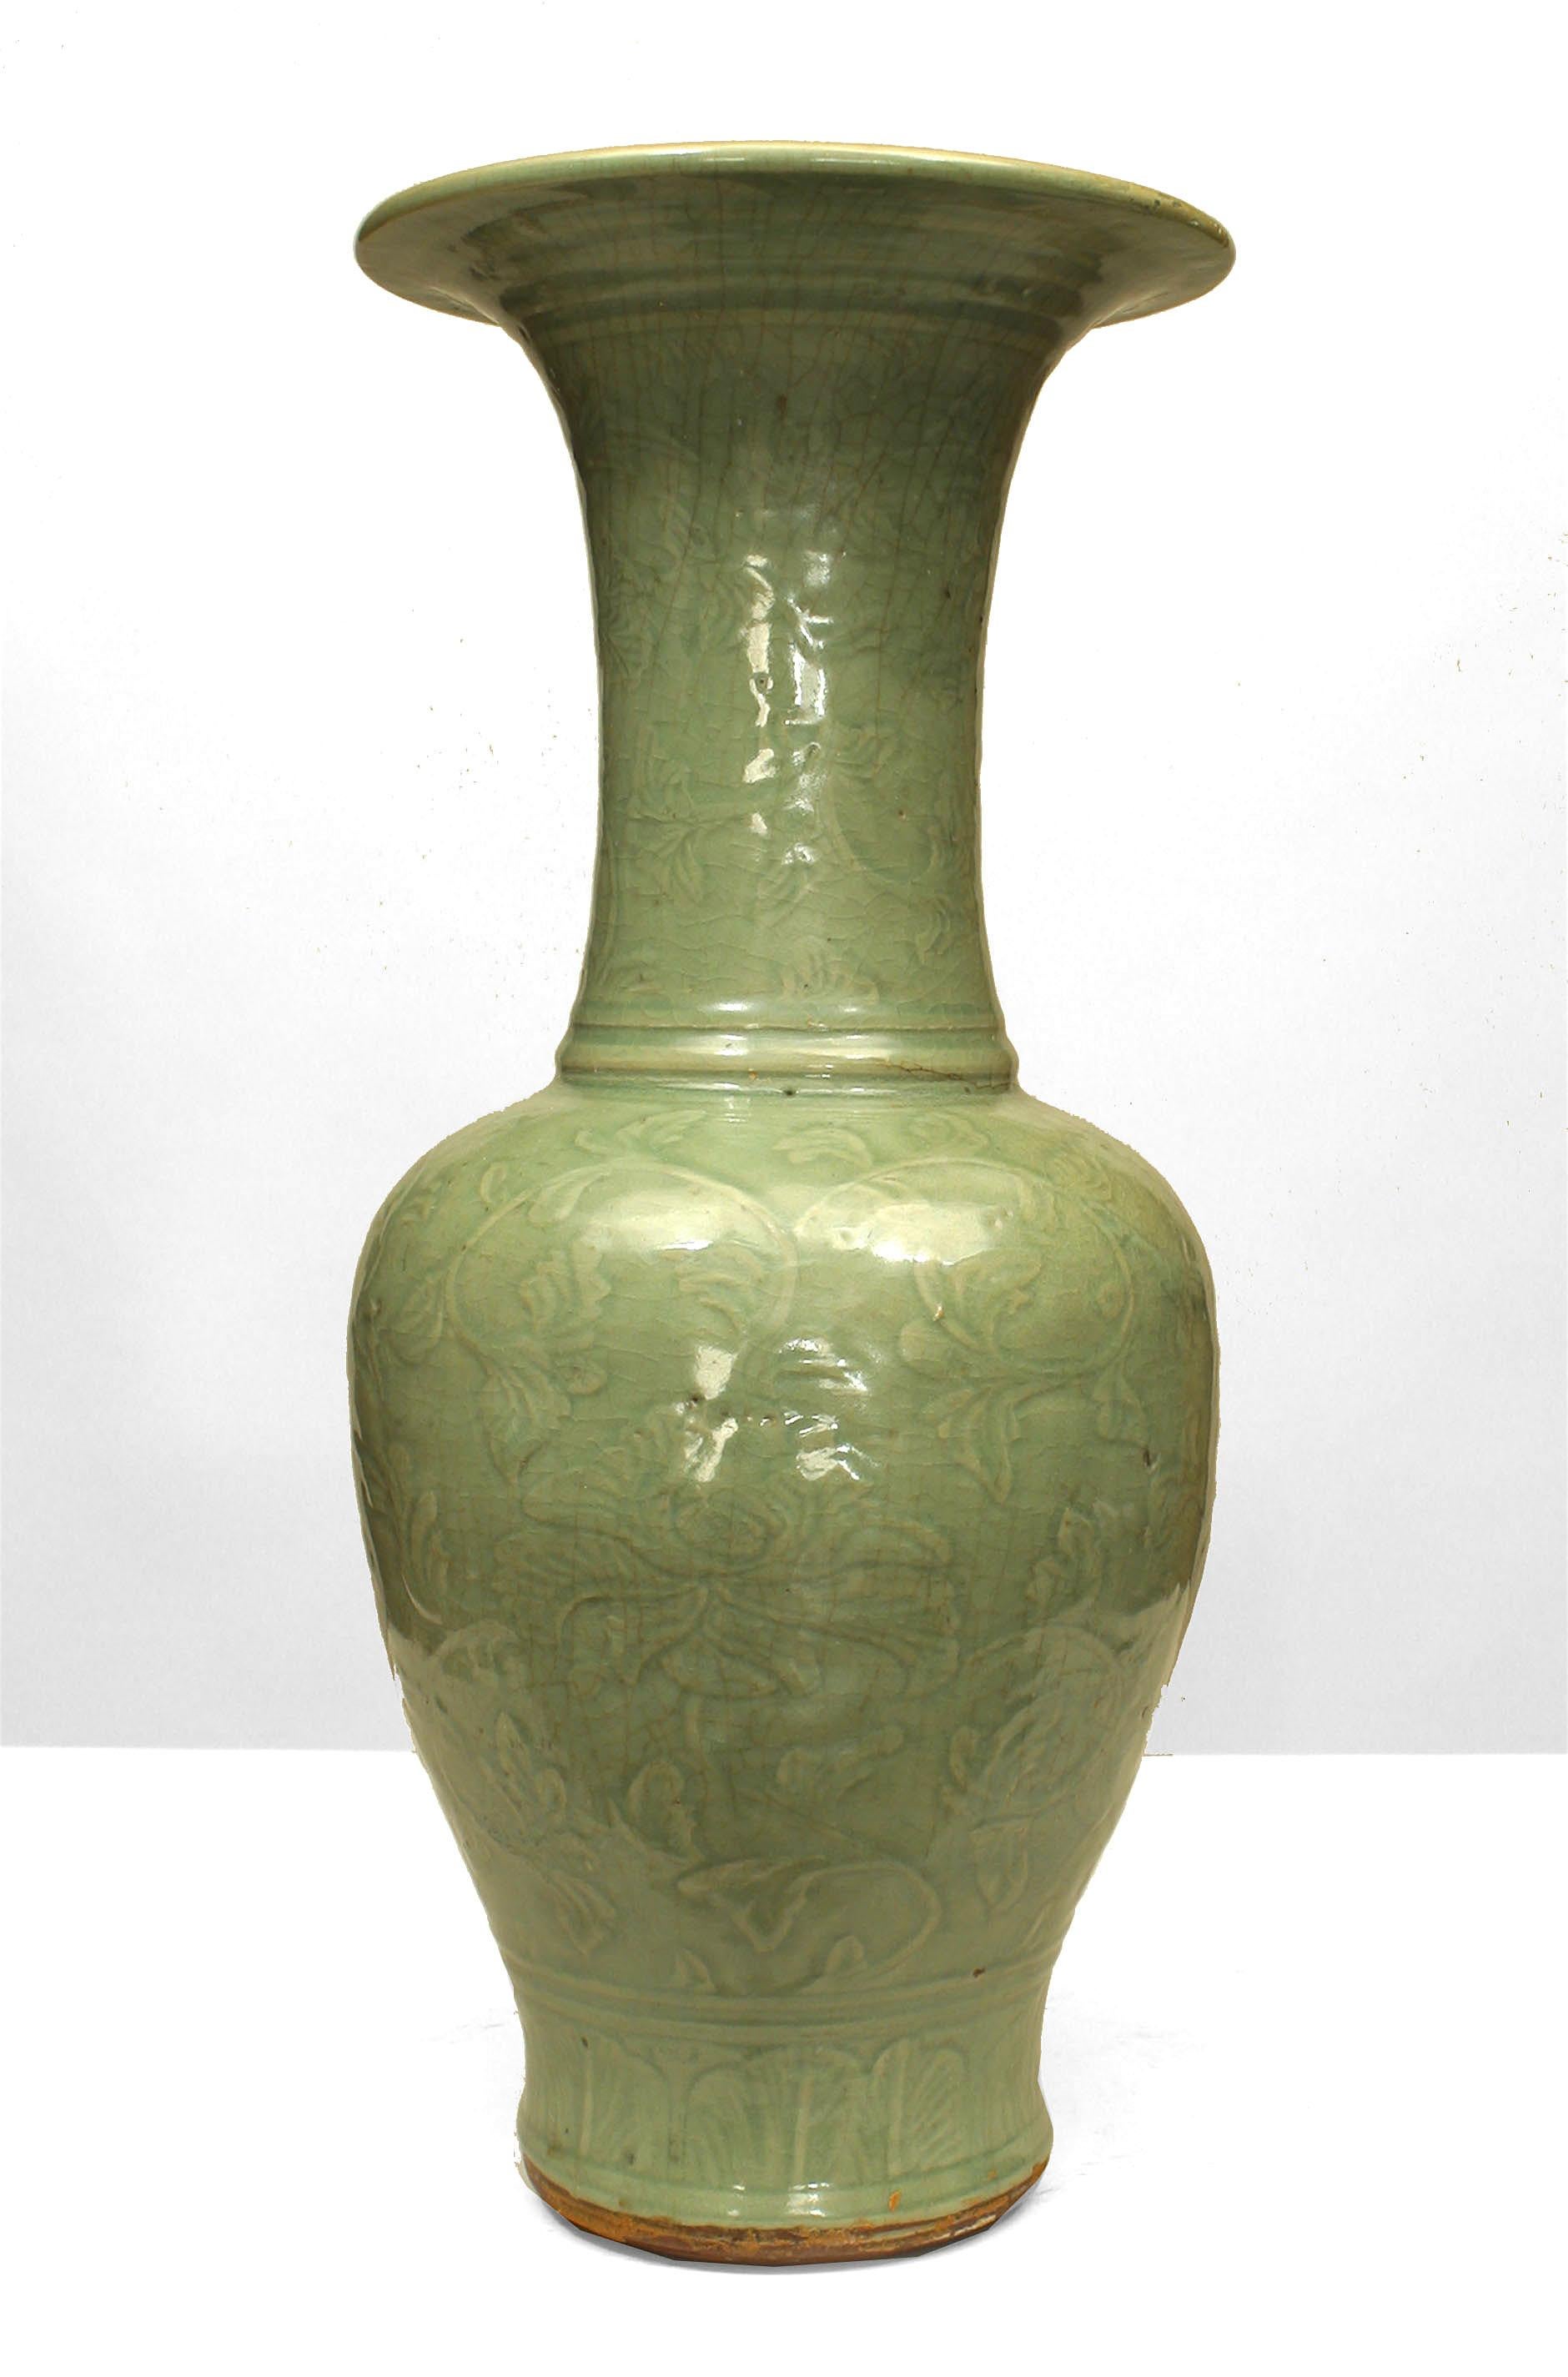 Chinese (Ming Dynasty 15th Cent) celadon stoneware yen yen vase with an overall molded floral relief design in the form of a bulbous base beneath a tapered neck and wide top.